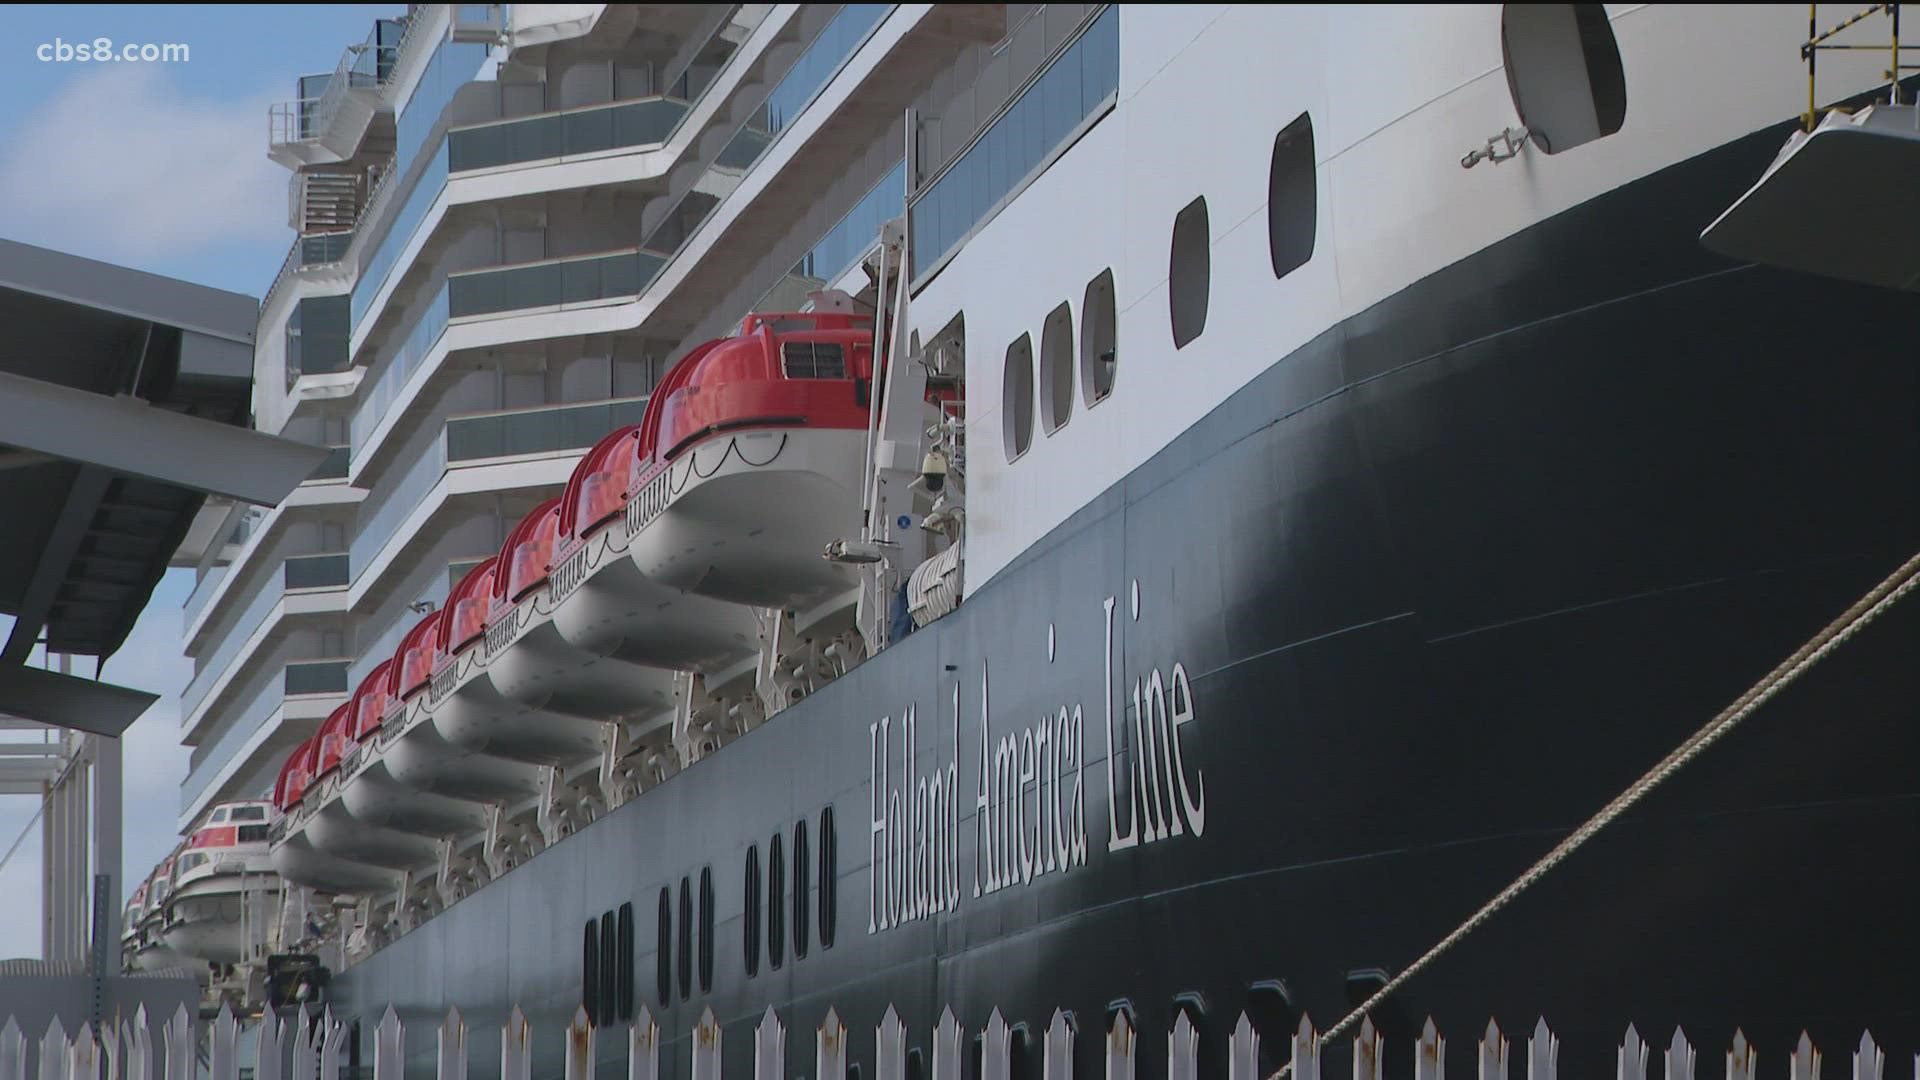 Mexican officials said about 21 crew members aboard the Koningsdam cruise ship operated by Holland America tested positive for COVID-19 on Dec. 23.